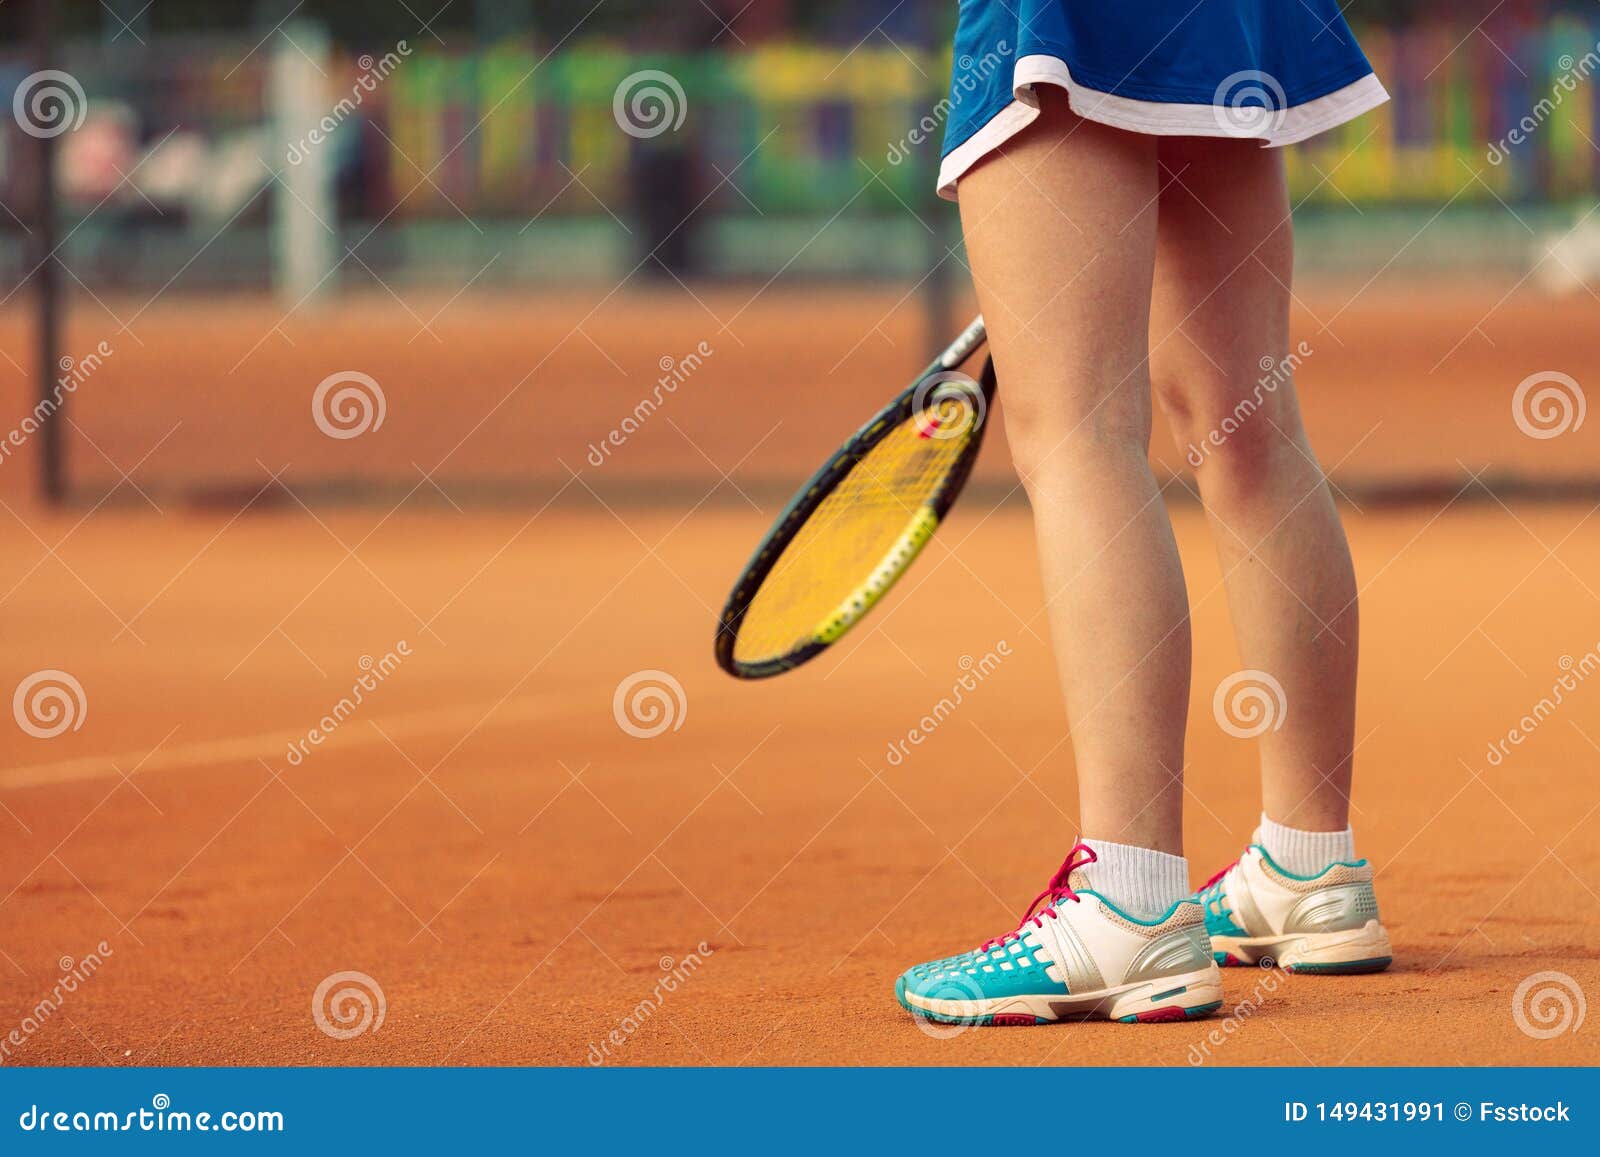 Beautiful Female Athlete with Perfect Body Posing on Tennis Court ...